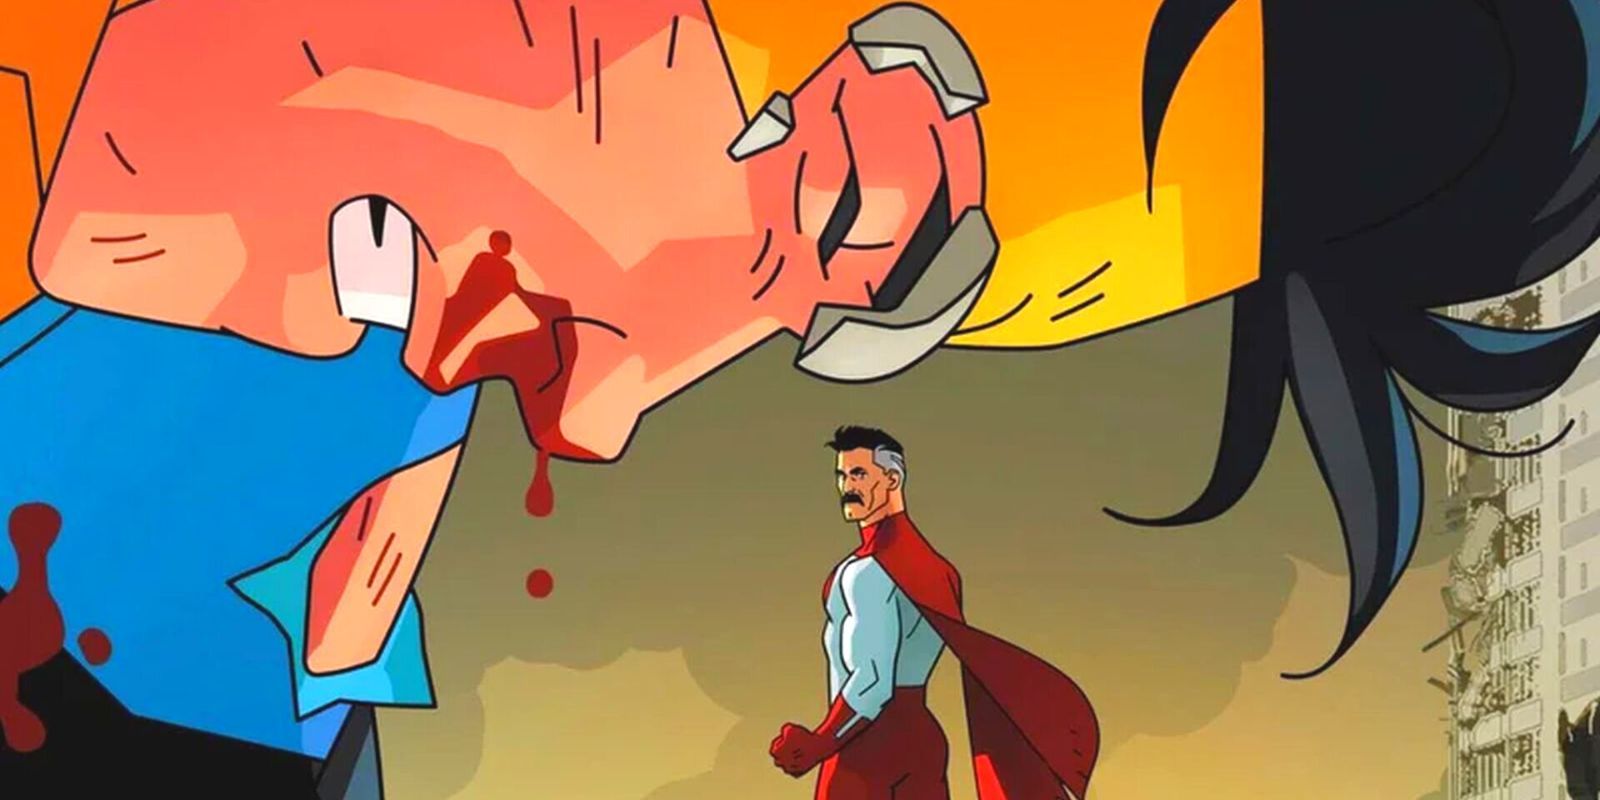 Invincible grimaces in pain, his nose bleeding, as Omni-Man watches on, unscathed